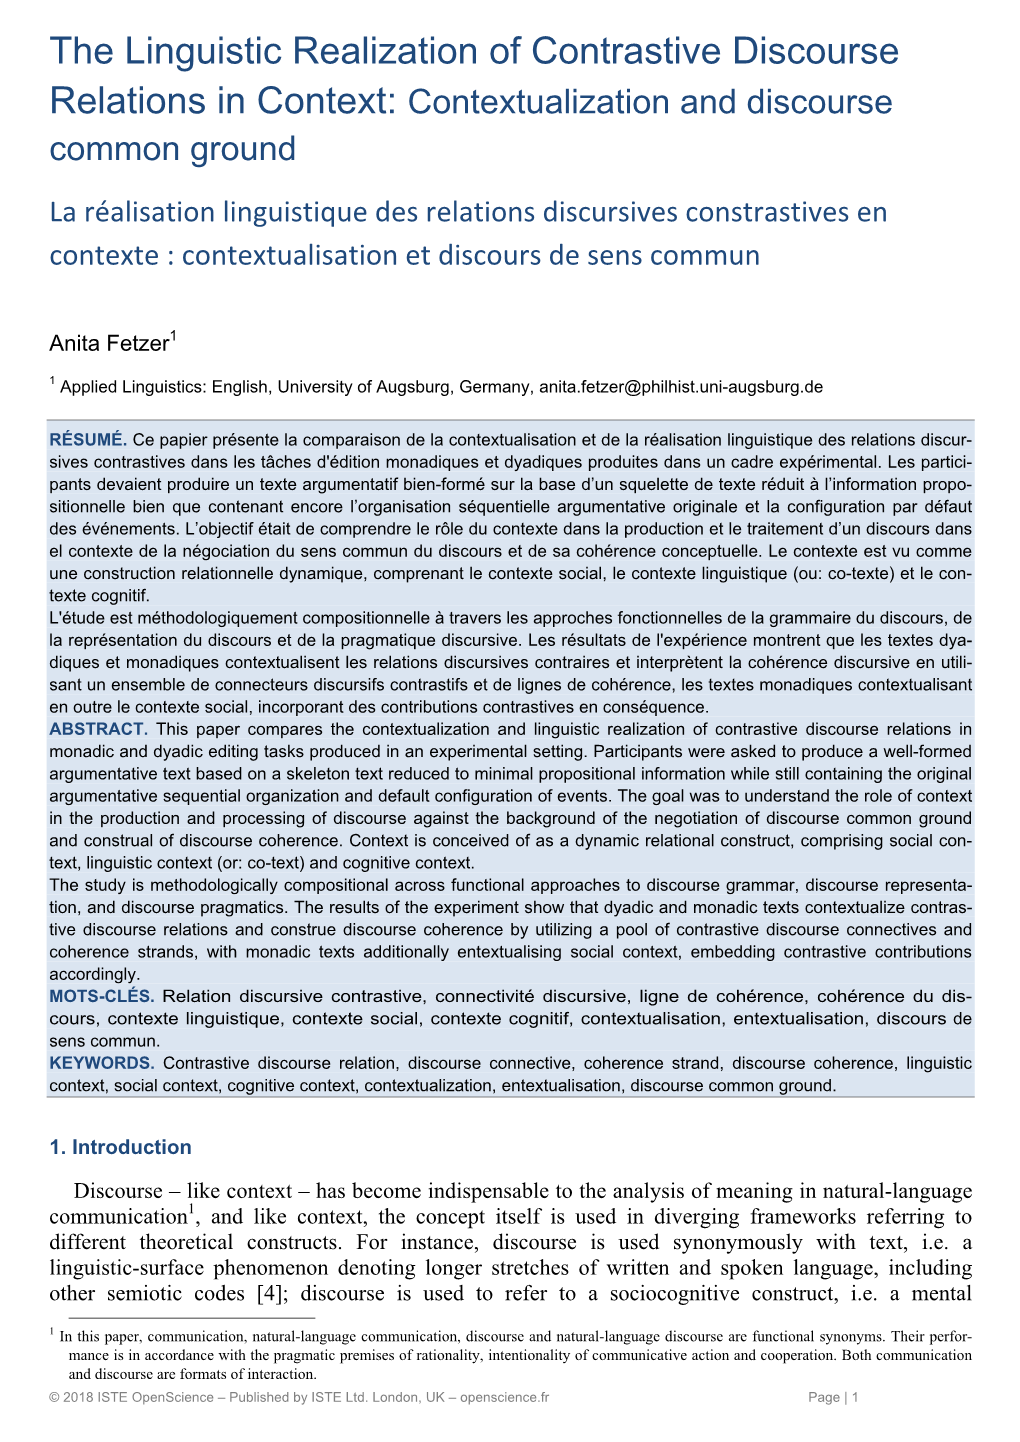 The Linguistic Realization of Contrastive Discourse Relations in Context: Contextualization and Discourse Common Ground